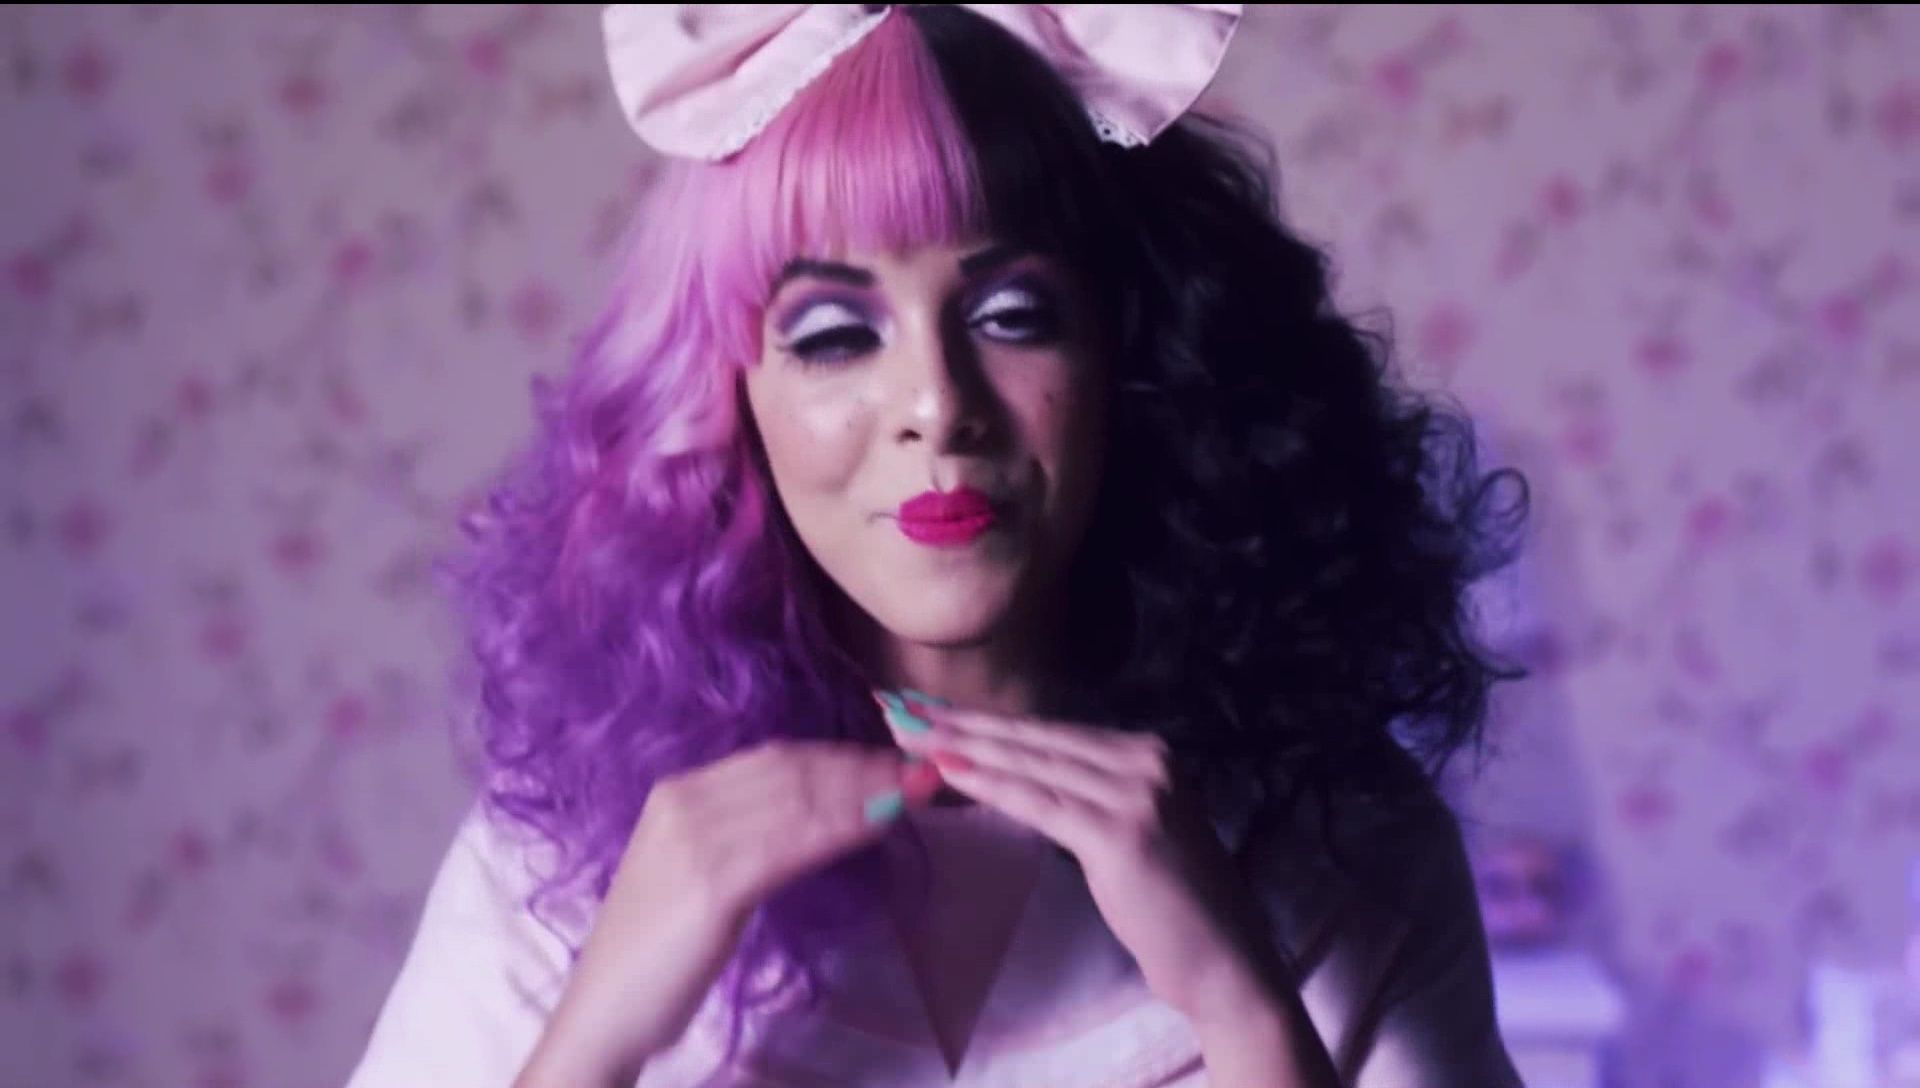 A woman with pink hair and a pink bow in her hair. - Melanie Martinez